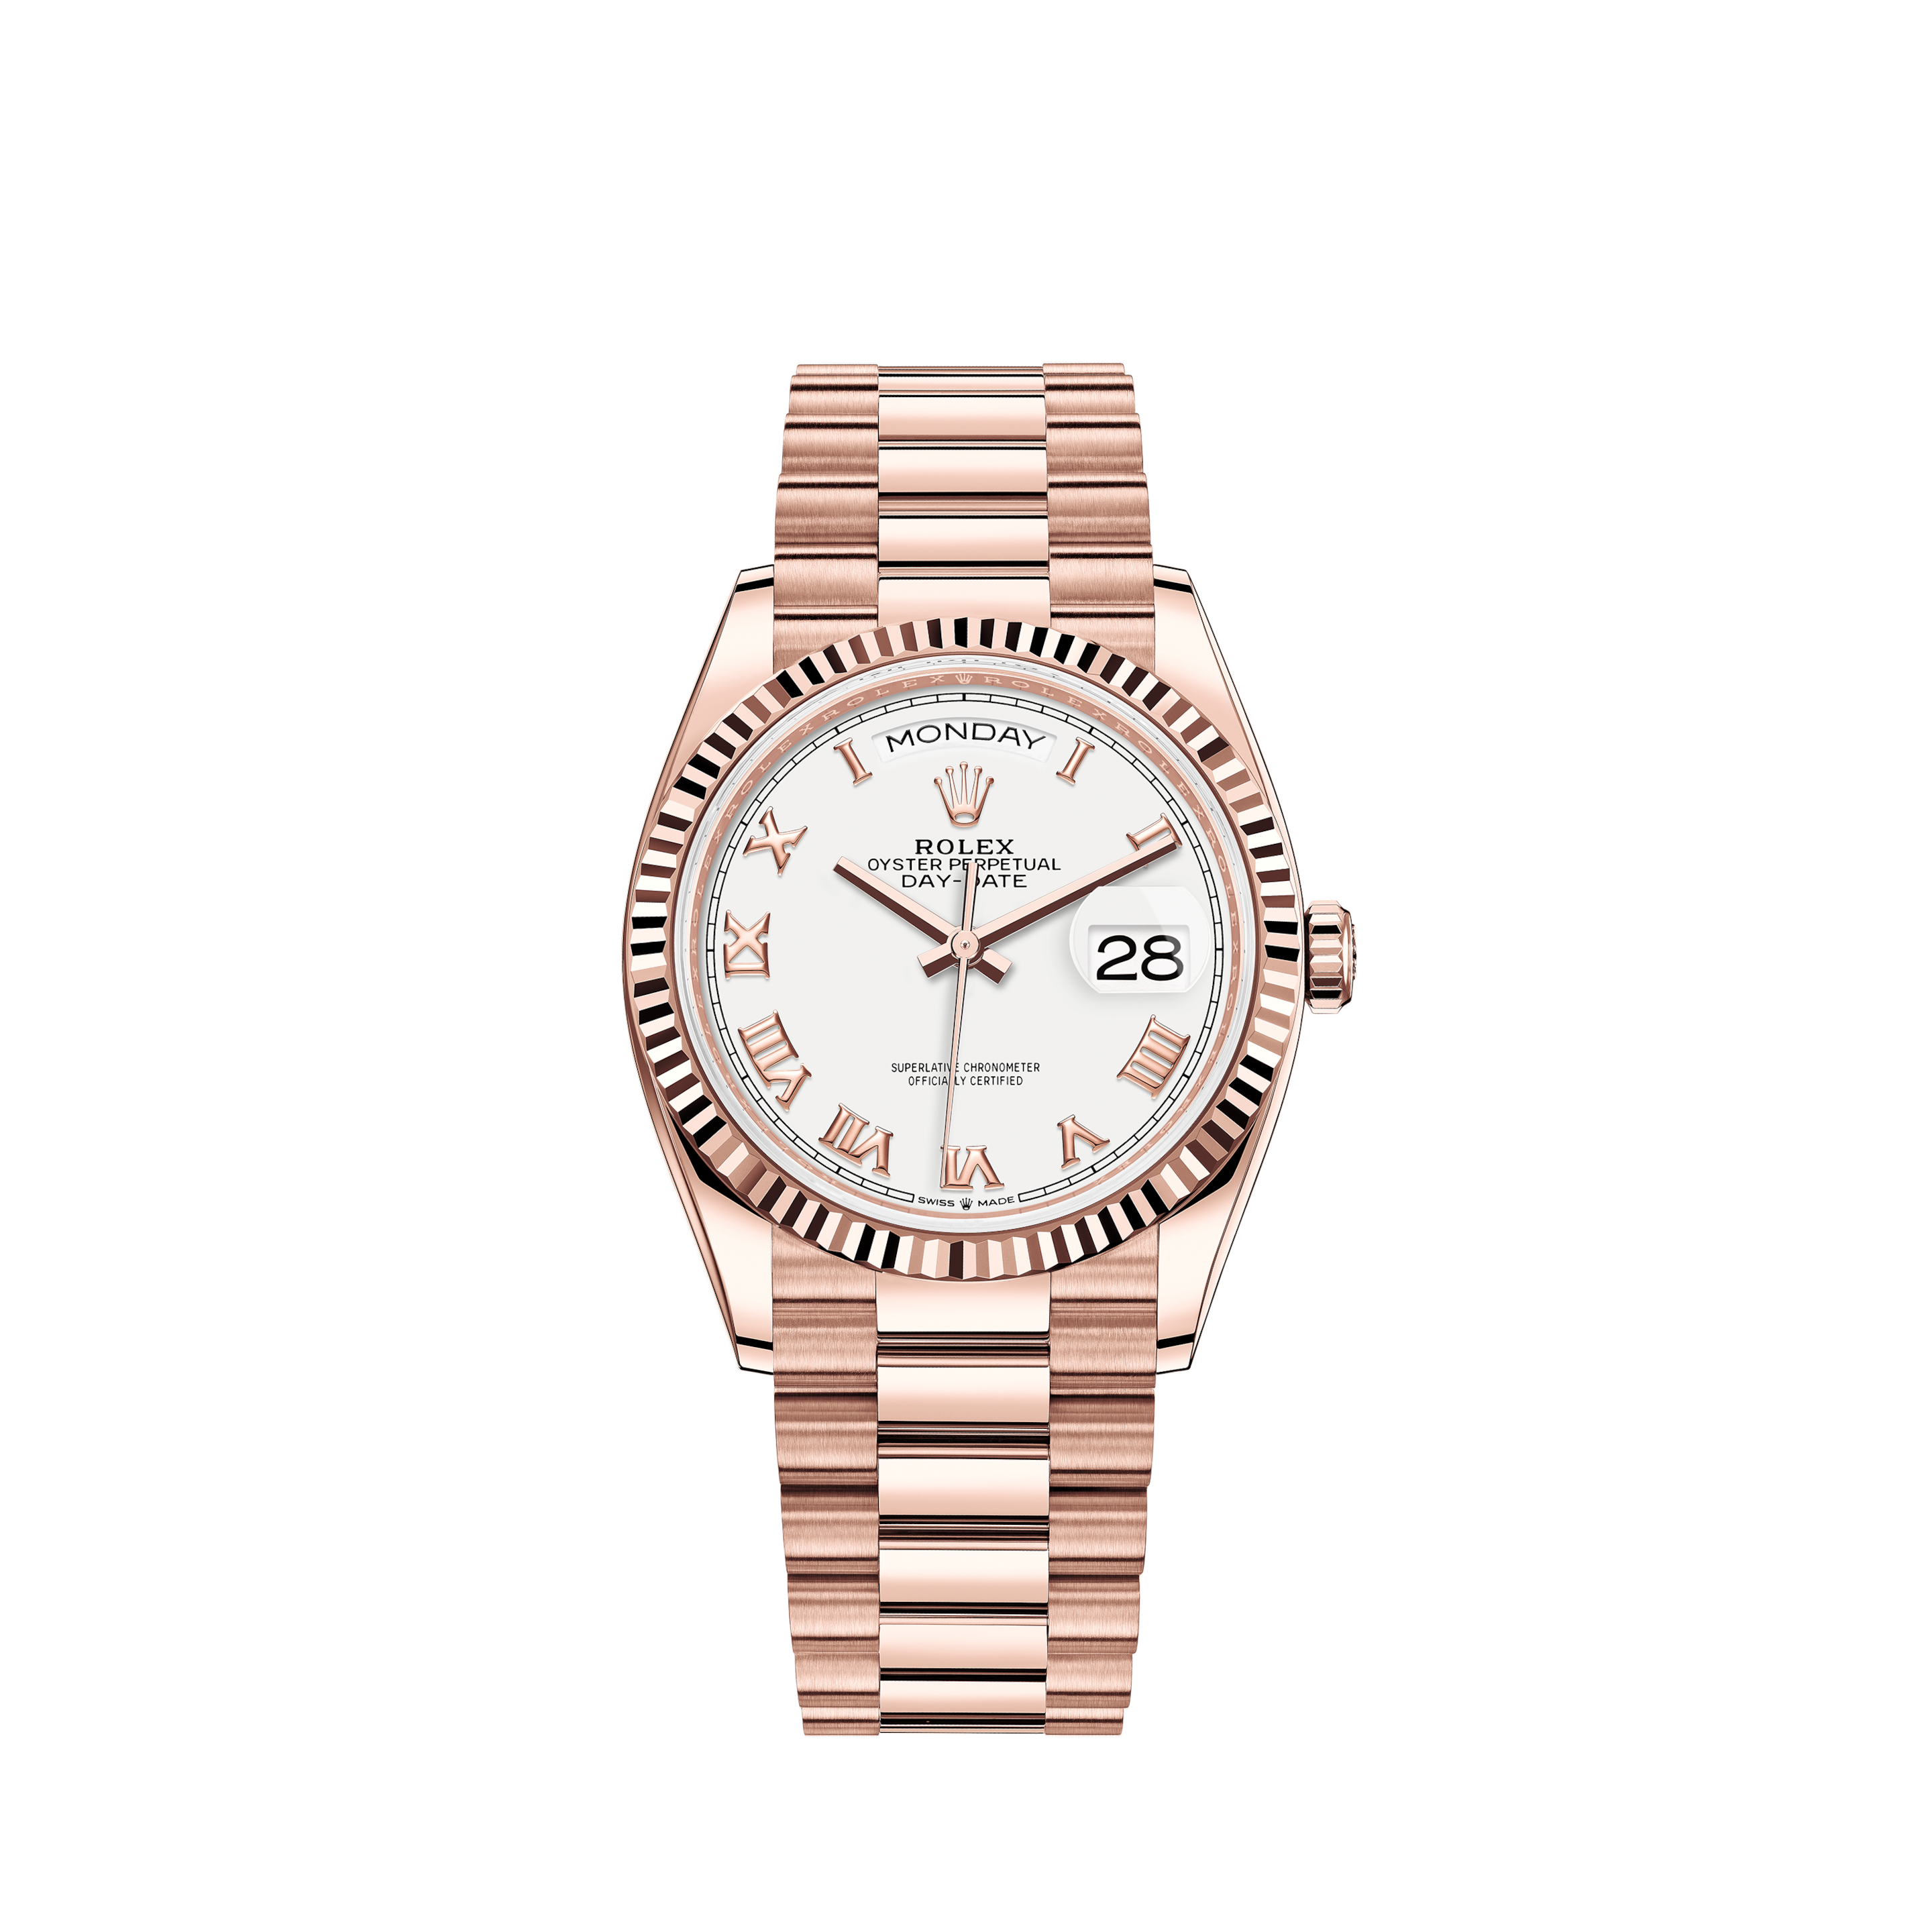 Rolex Oyster Perpetual - Ref. 6719 - Automatik - Kobaltblaues Blatt - 25mm - ca. 1979 - AAWRolex Oyster Perpetual - Ref.: 67480 - White/Roman - LC100 - 31mm - Automatic - AAW